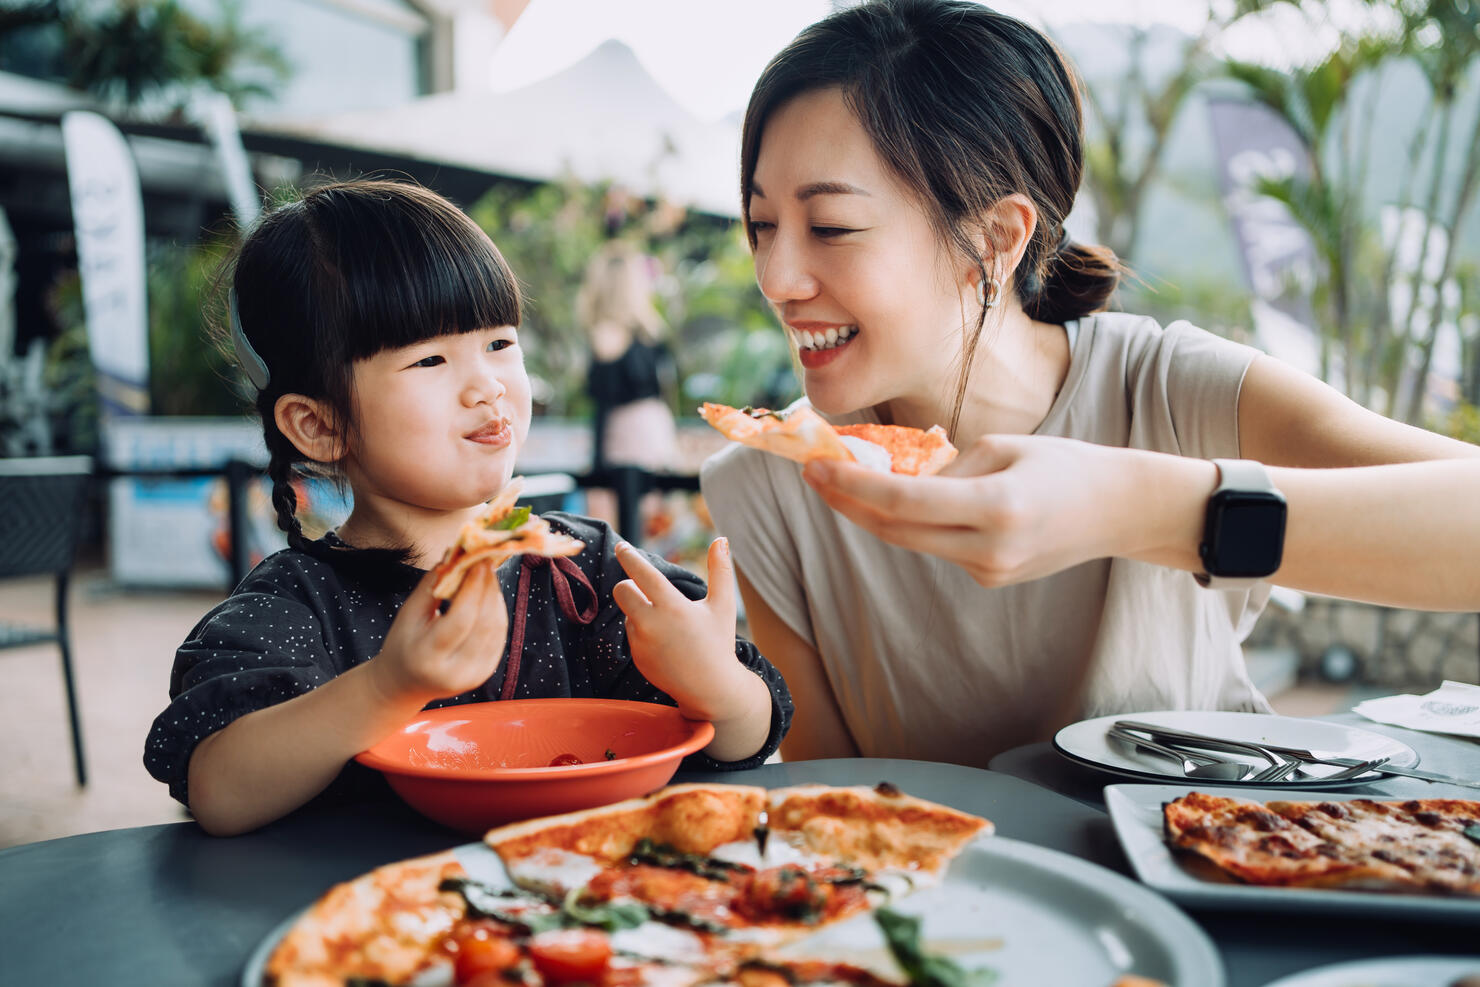 Joyful young Asian mother and lovely little daughter enjoying pizza lunch in an outdoor restaurant. Family enjoying bonding time and a happy meal together. Family and eating out lifestyle